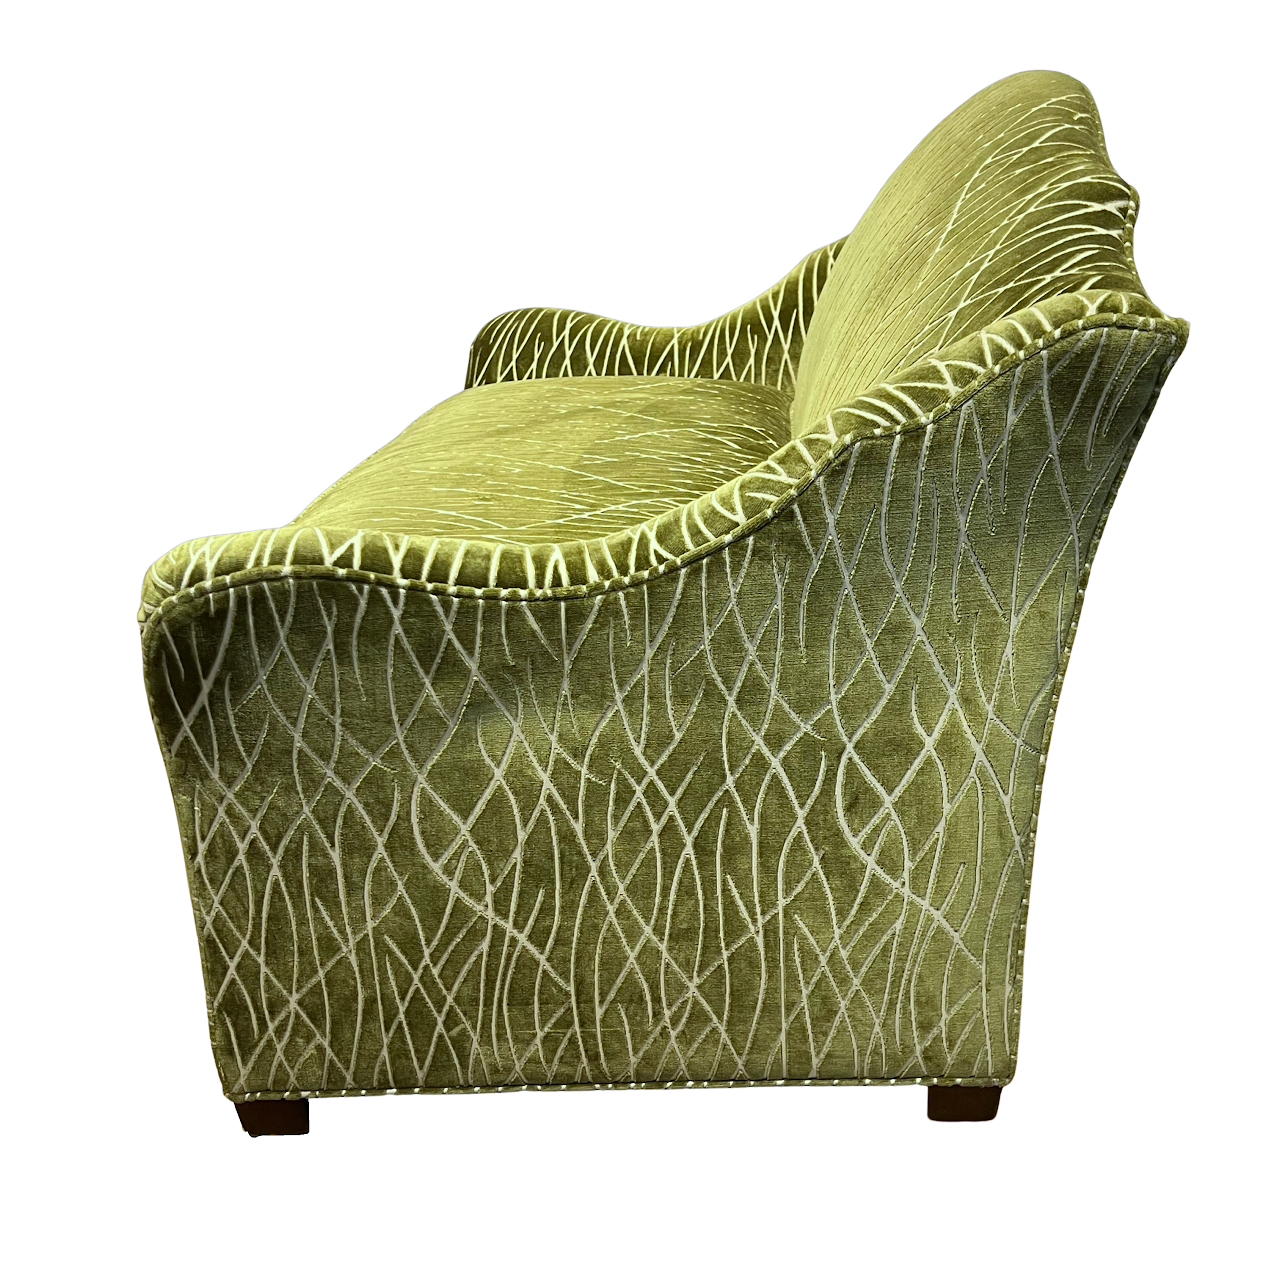 Bunny Williams Home Pierre Loveseat